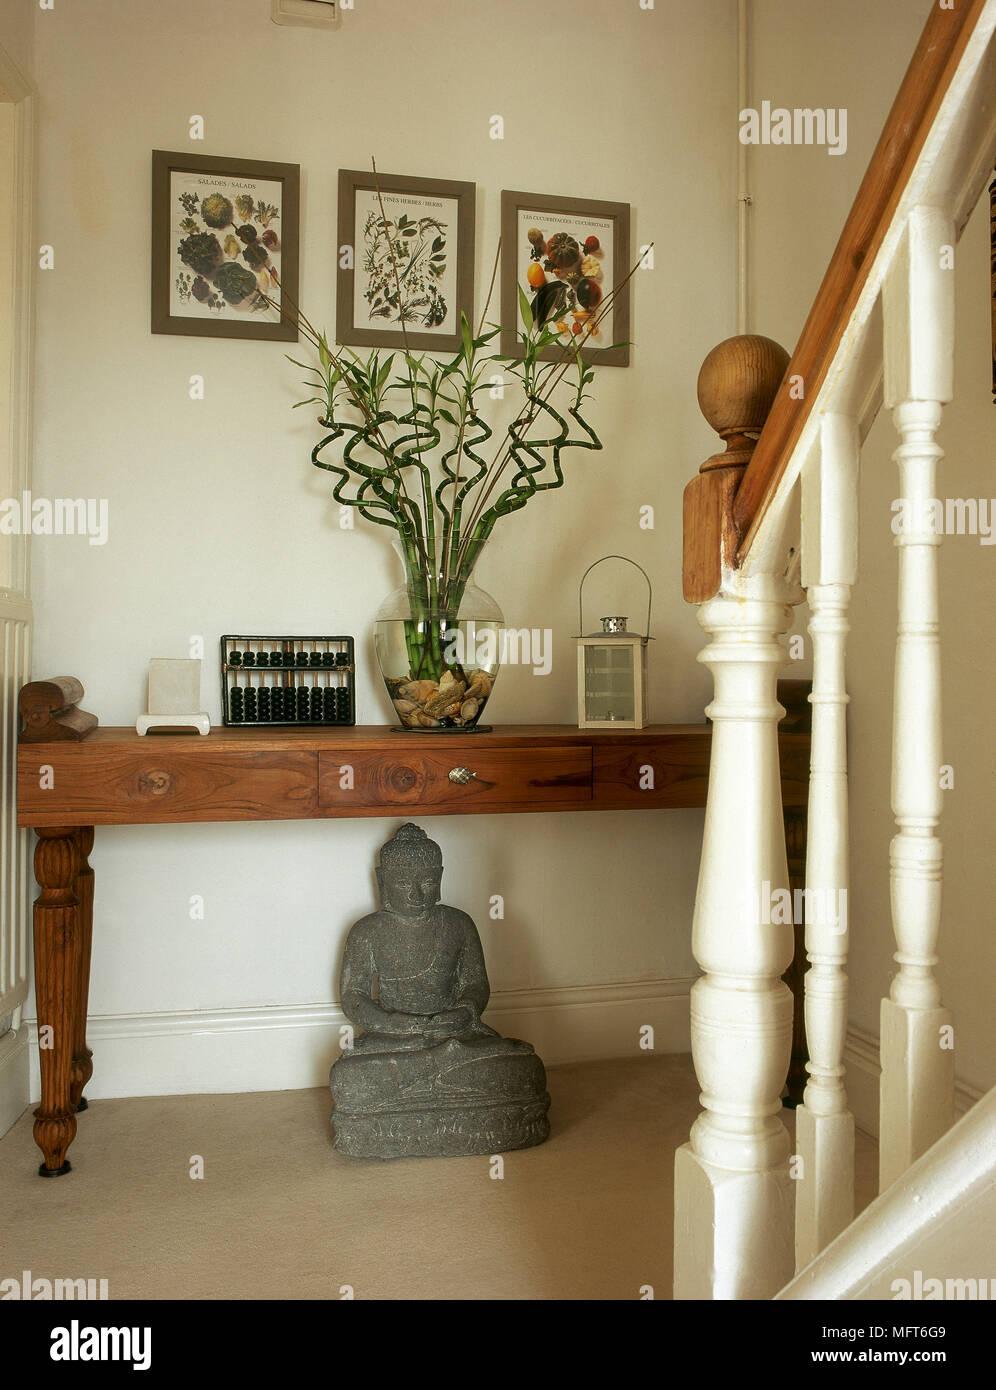 Traditional stairway landing with a newel post, framed botanical artwork, buddha statue, and a wooden table. Stock Photo